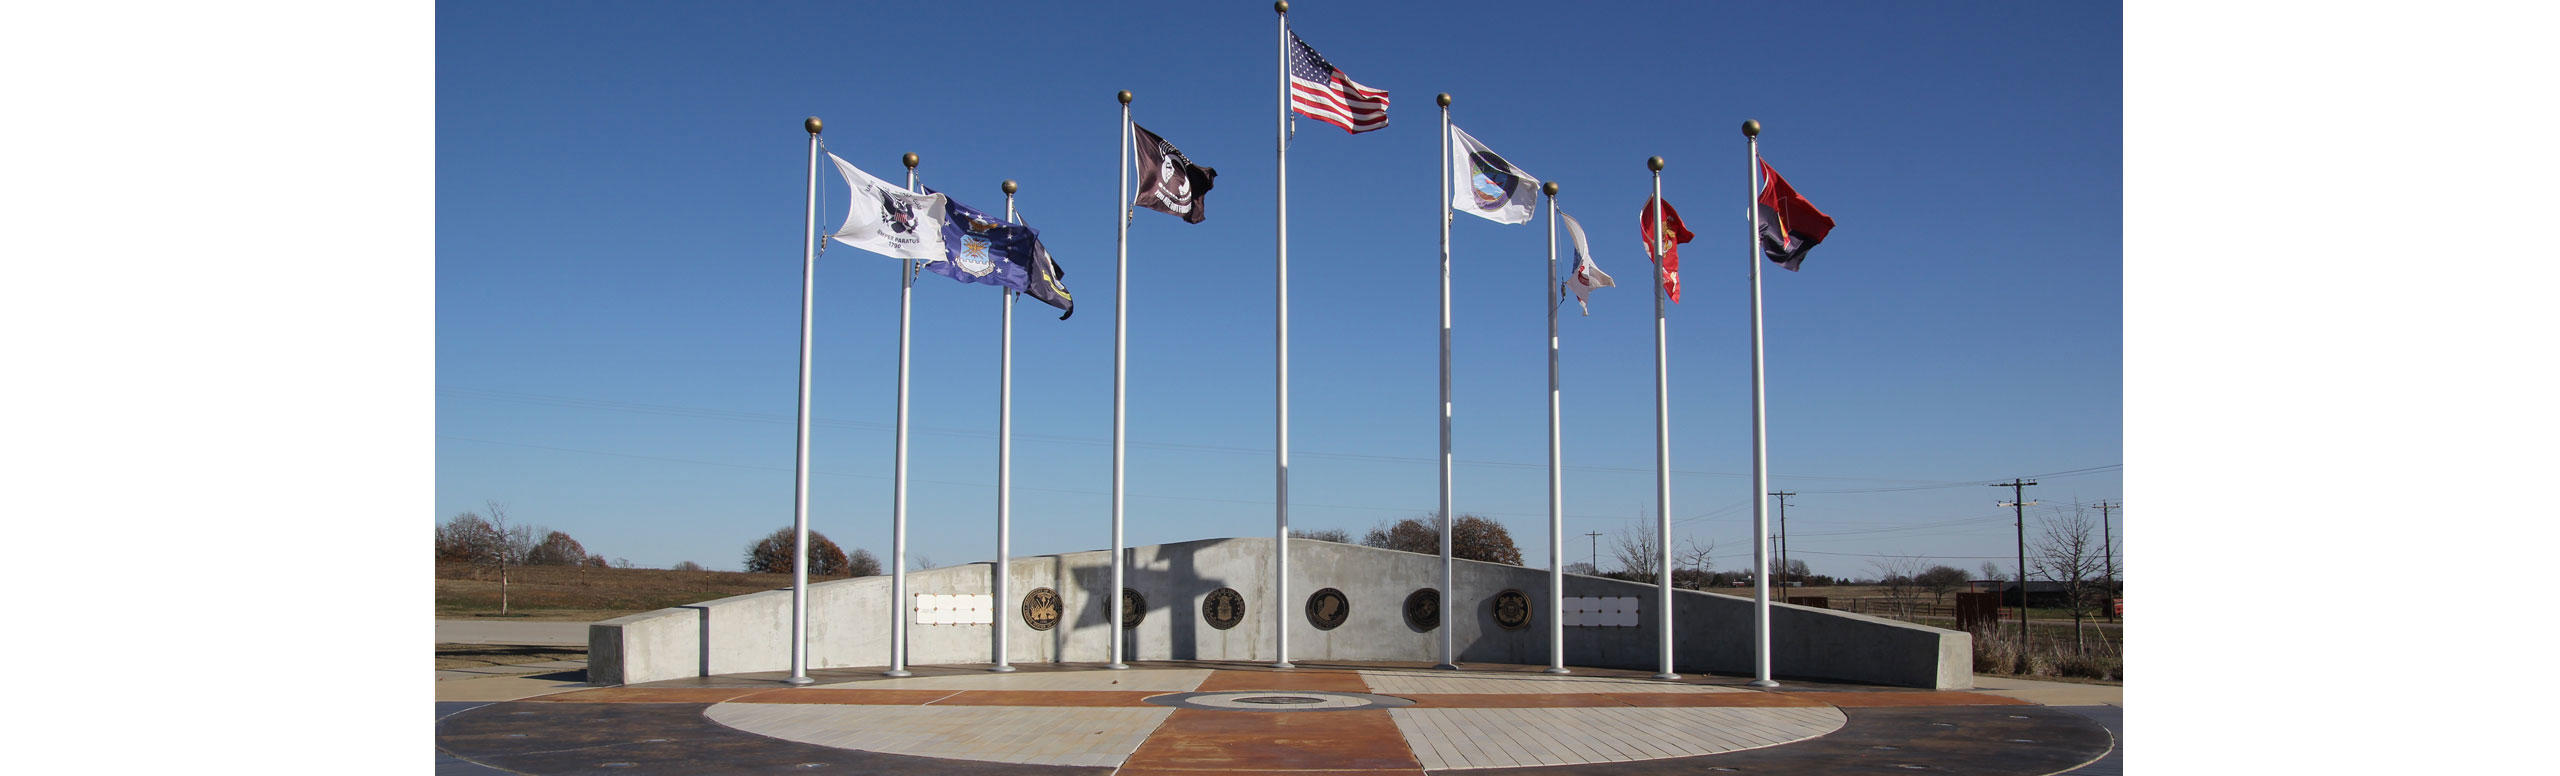 The Seminole Nation of Oklahoma- outside shot of plaques on a concrete wall and nine standing flags flying in the wind.